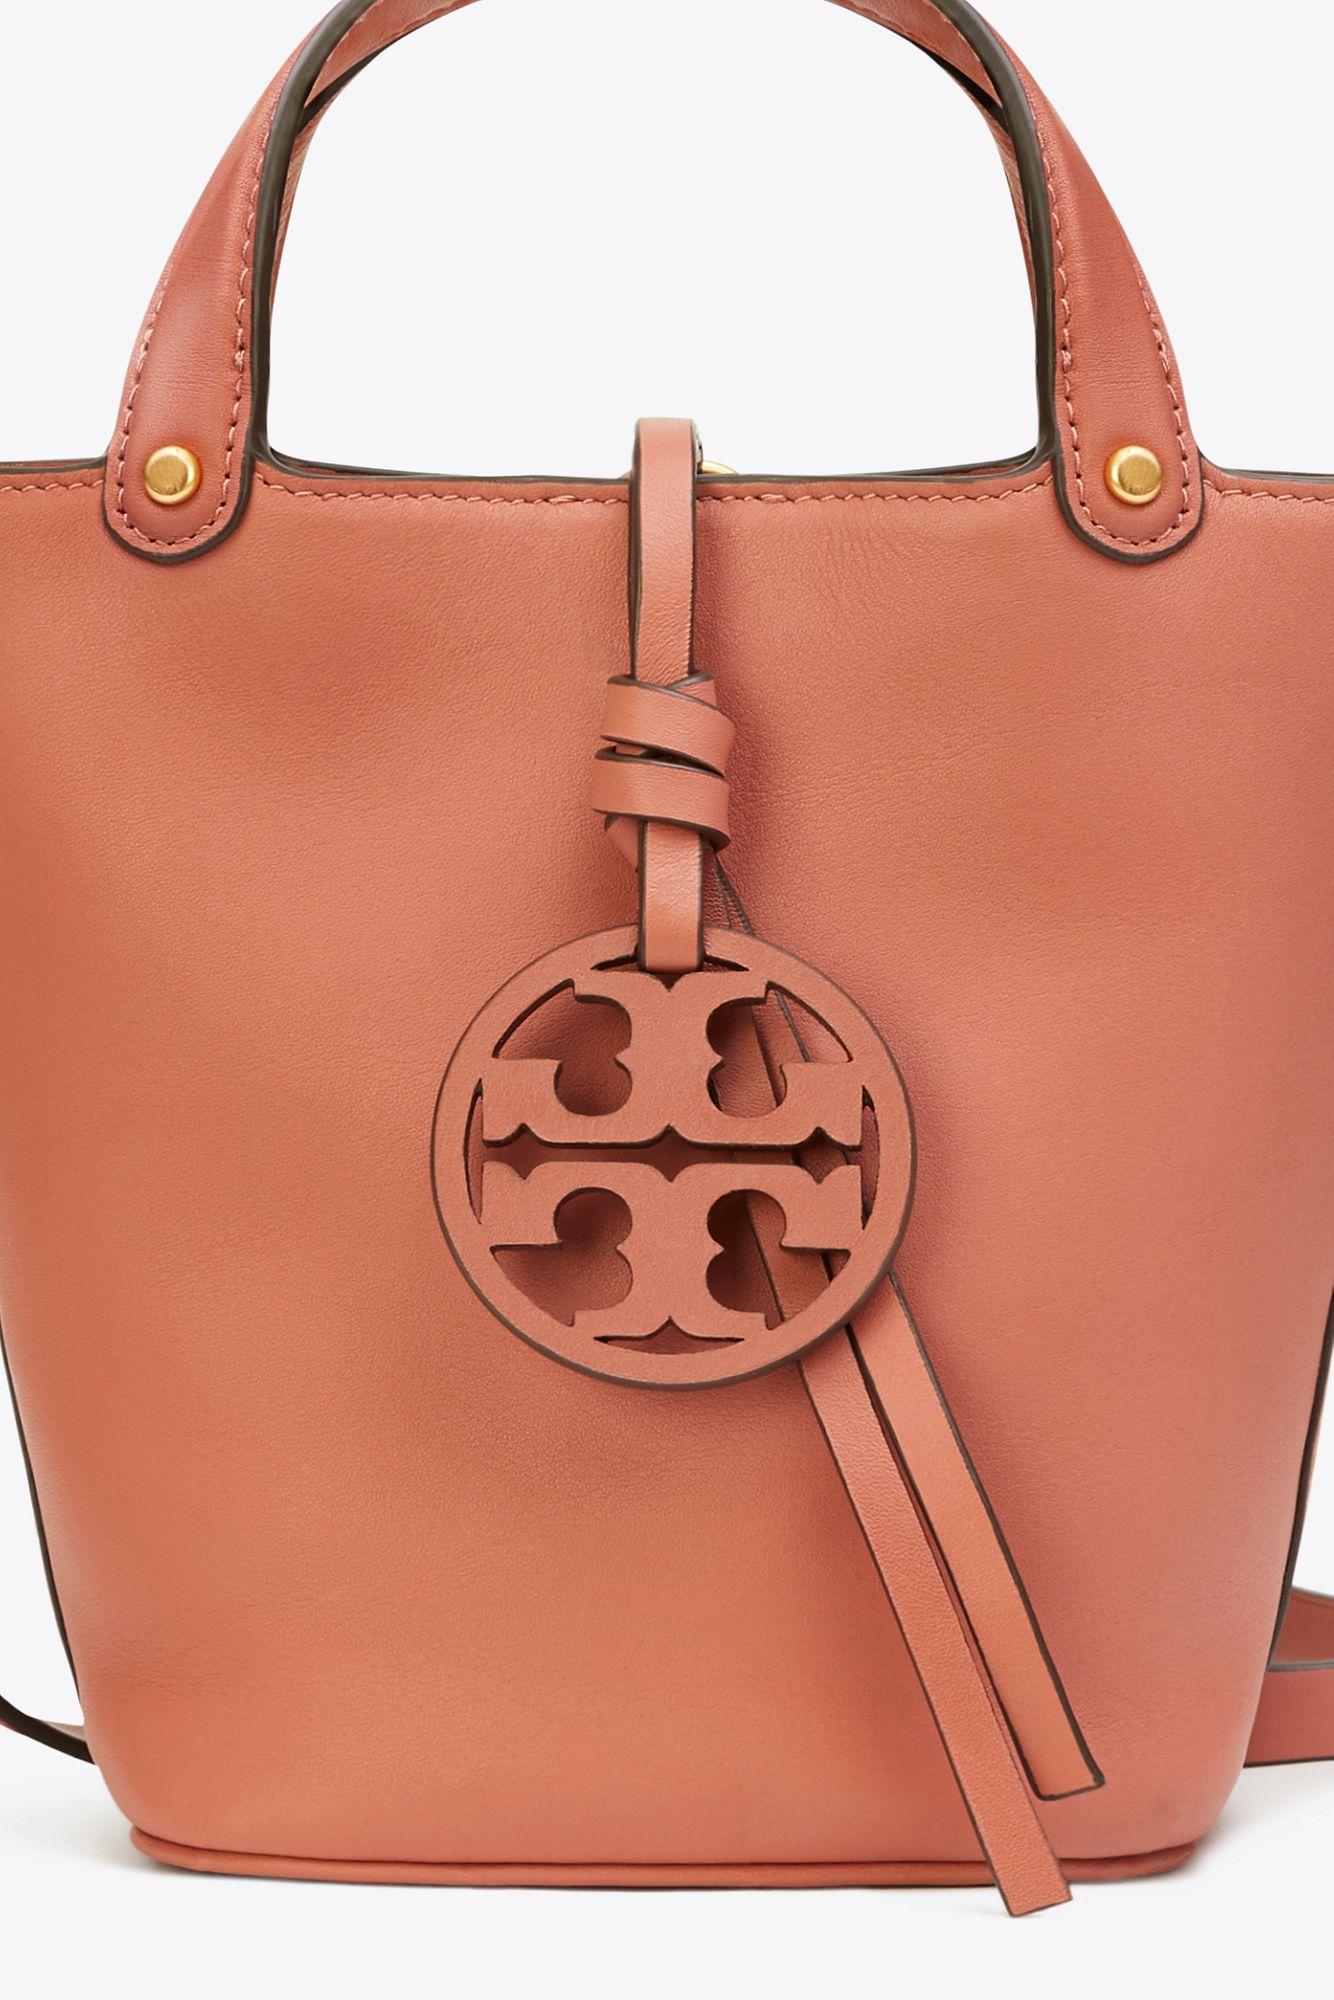 Tory Burch Small Miller Bucket Bag in Pink | Lyst